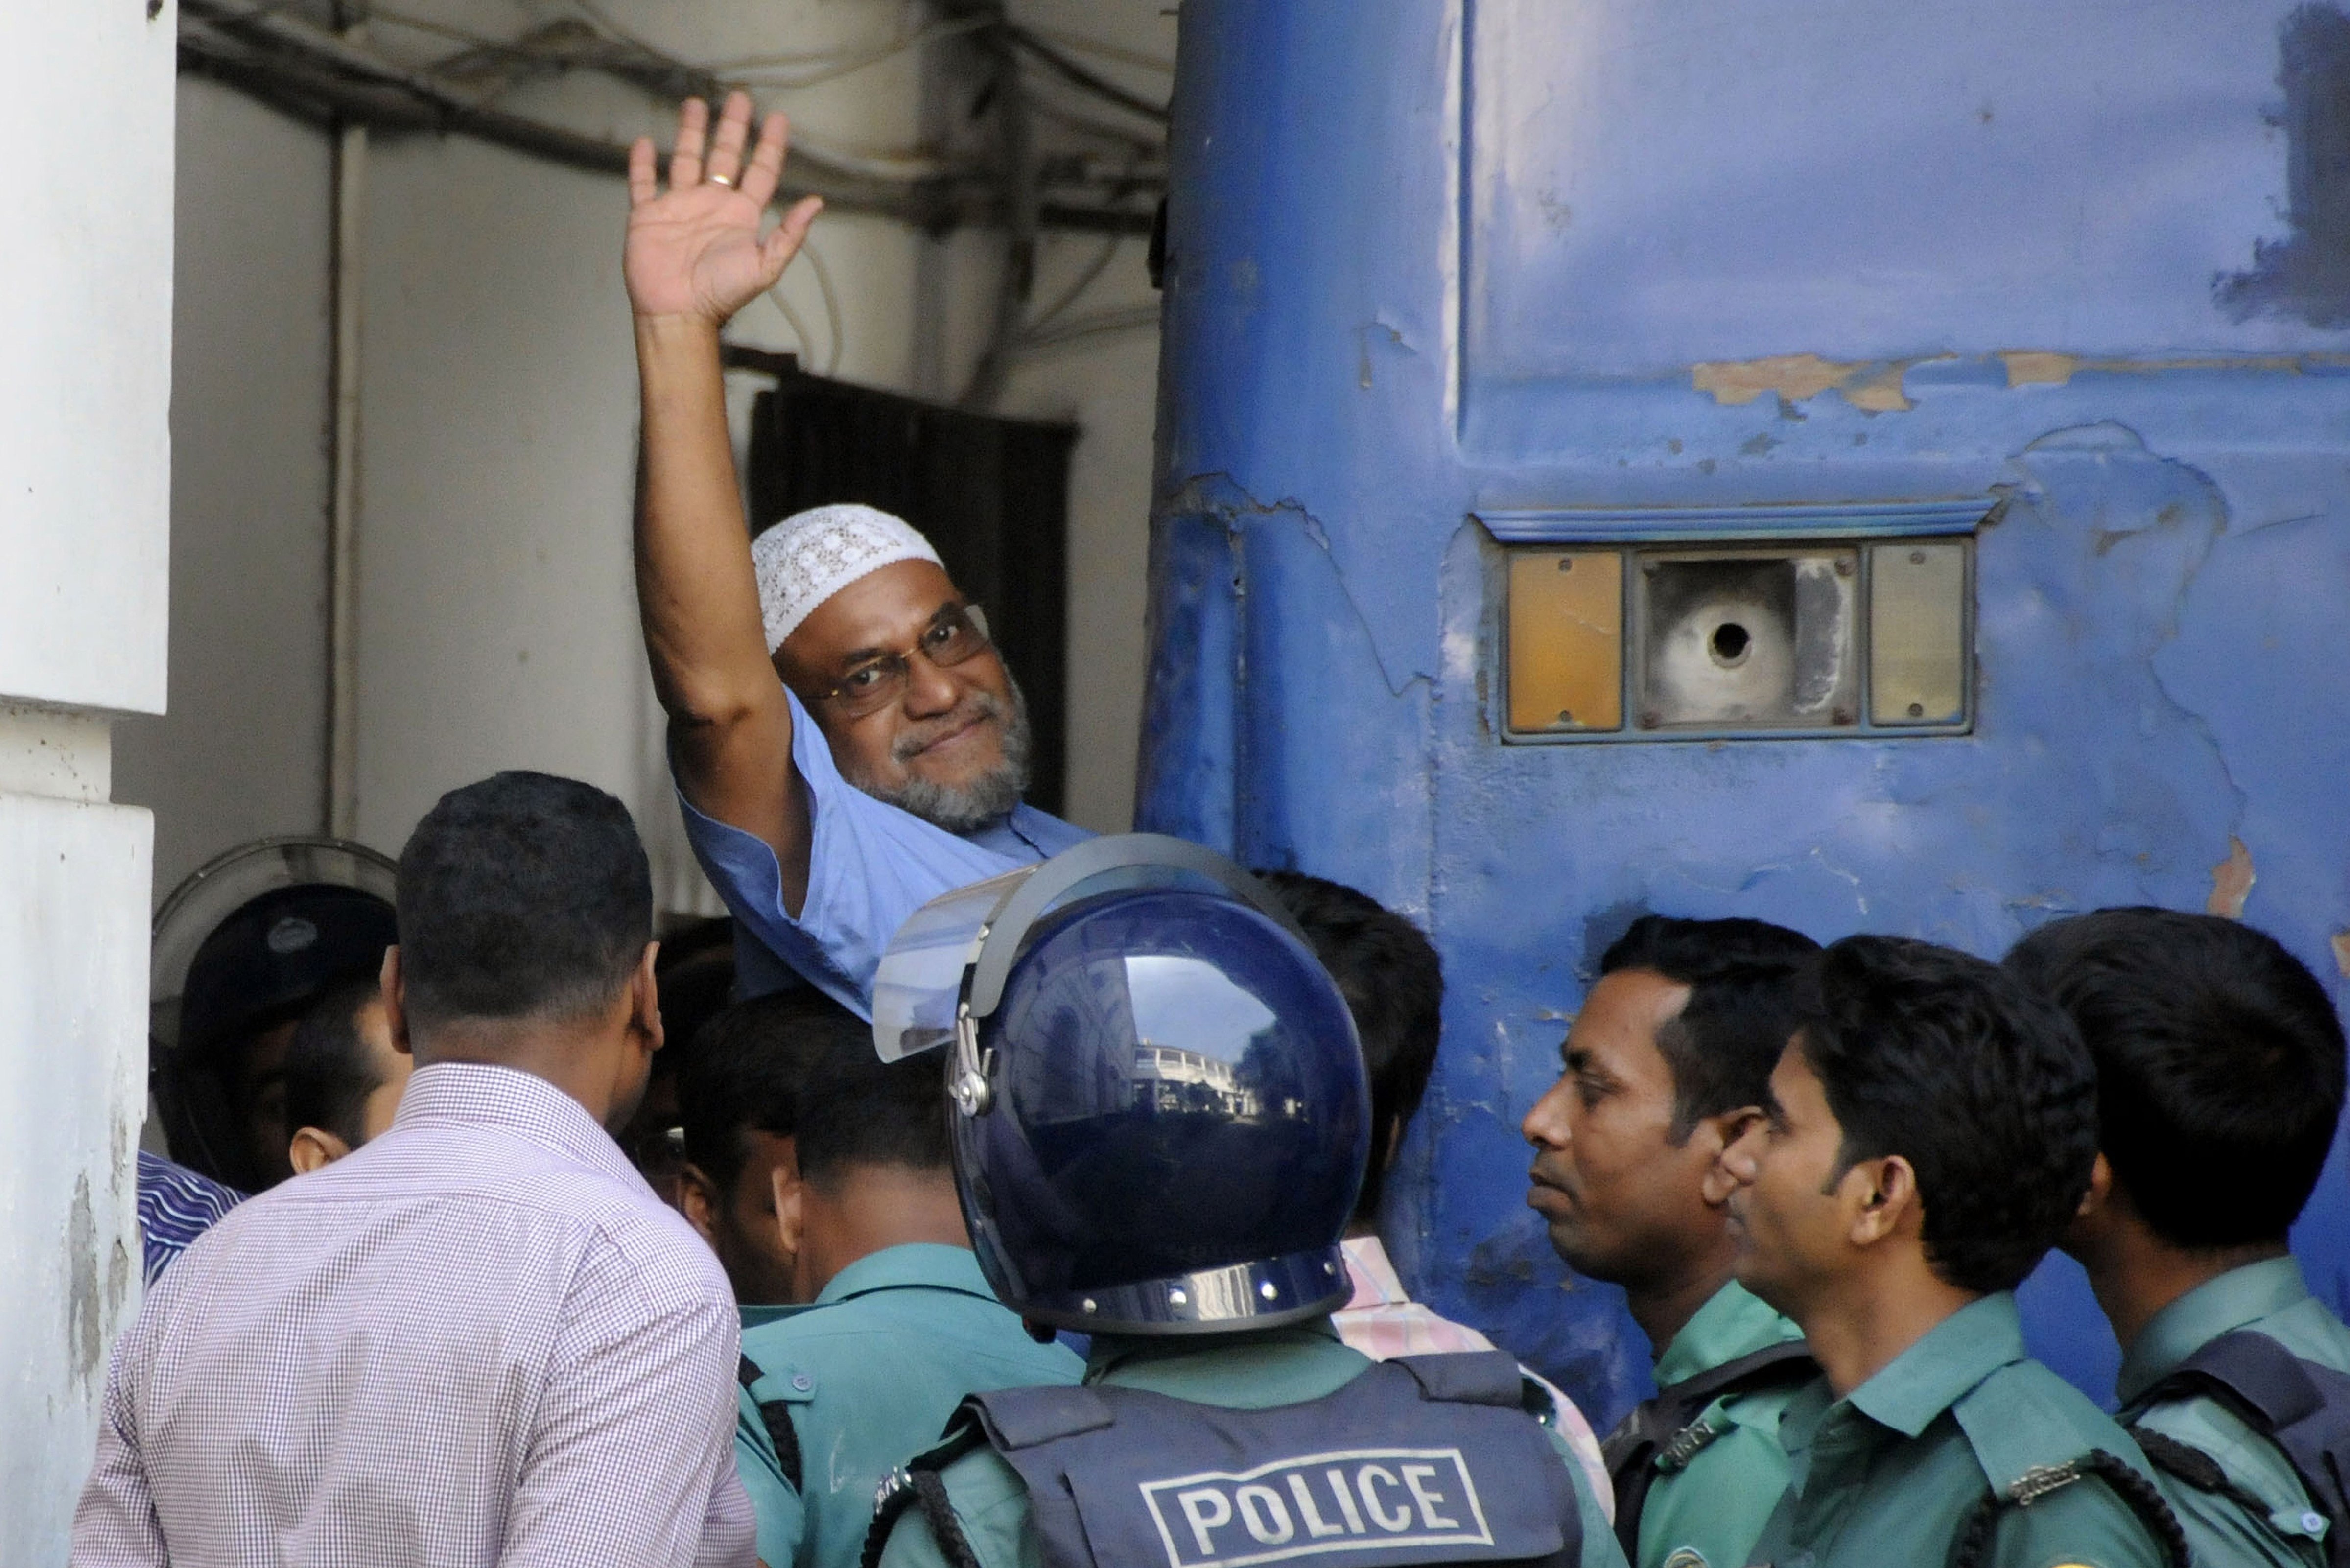 Bangladeshi Jamaat-e-Islami party leader, Mir Quasem Ali, waves his hand as he enters a van at the International Crimes Tribunal court in Dhaka on Nov. 2, 2014 (Stringer—AFP/Getty Images)